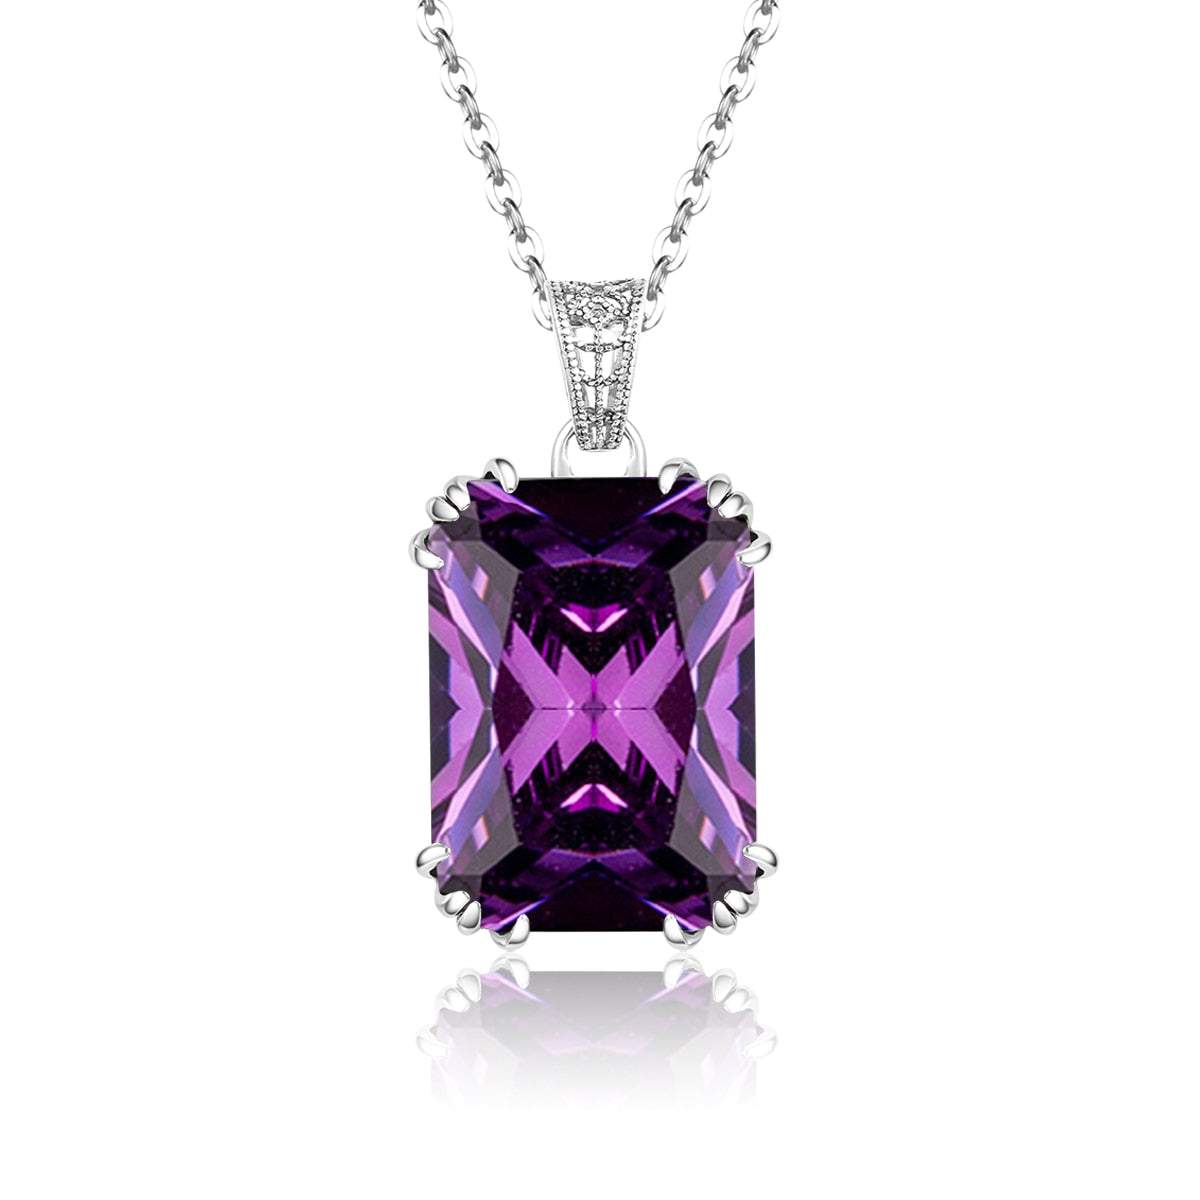 100% Real 925 Sterling Silver Fine Jewelry Necklace Square Garnet Classic Slide Pendants For Women Accessories Silver 925 Gifts Amethyst